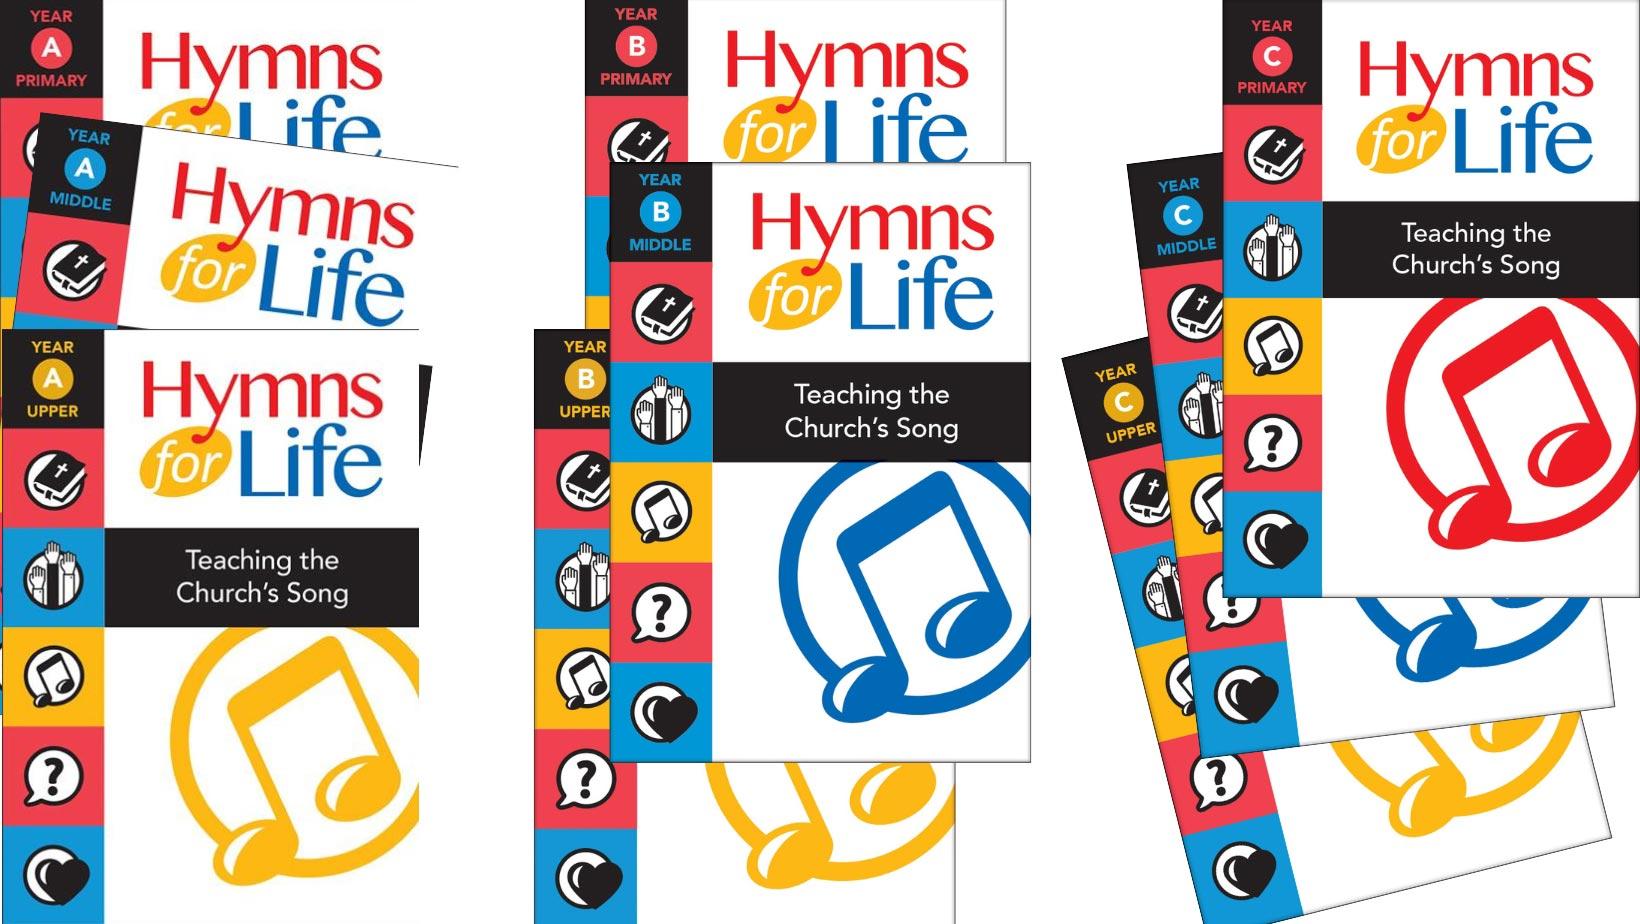 Hymns for Life cover images